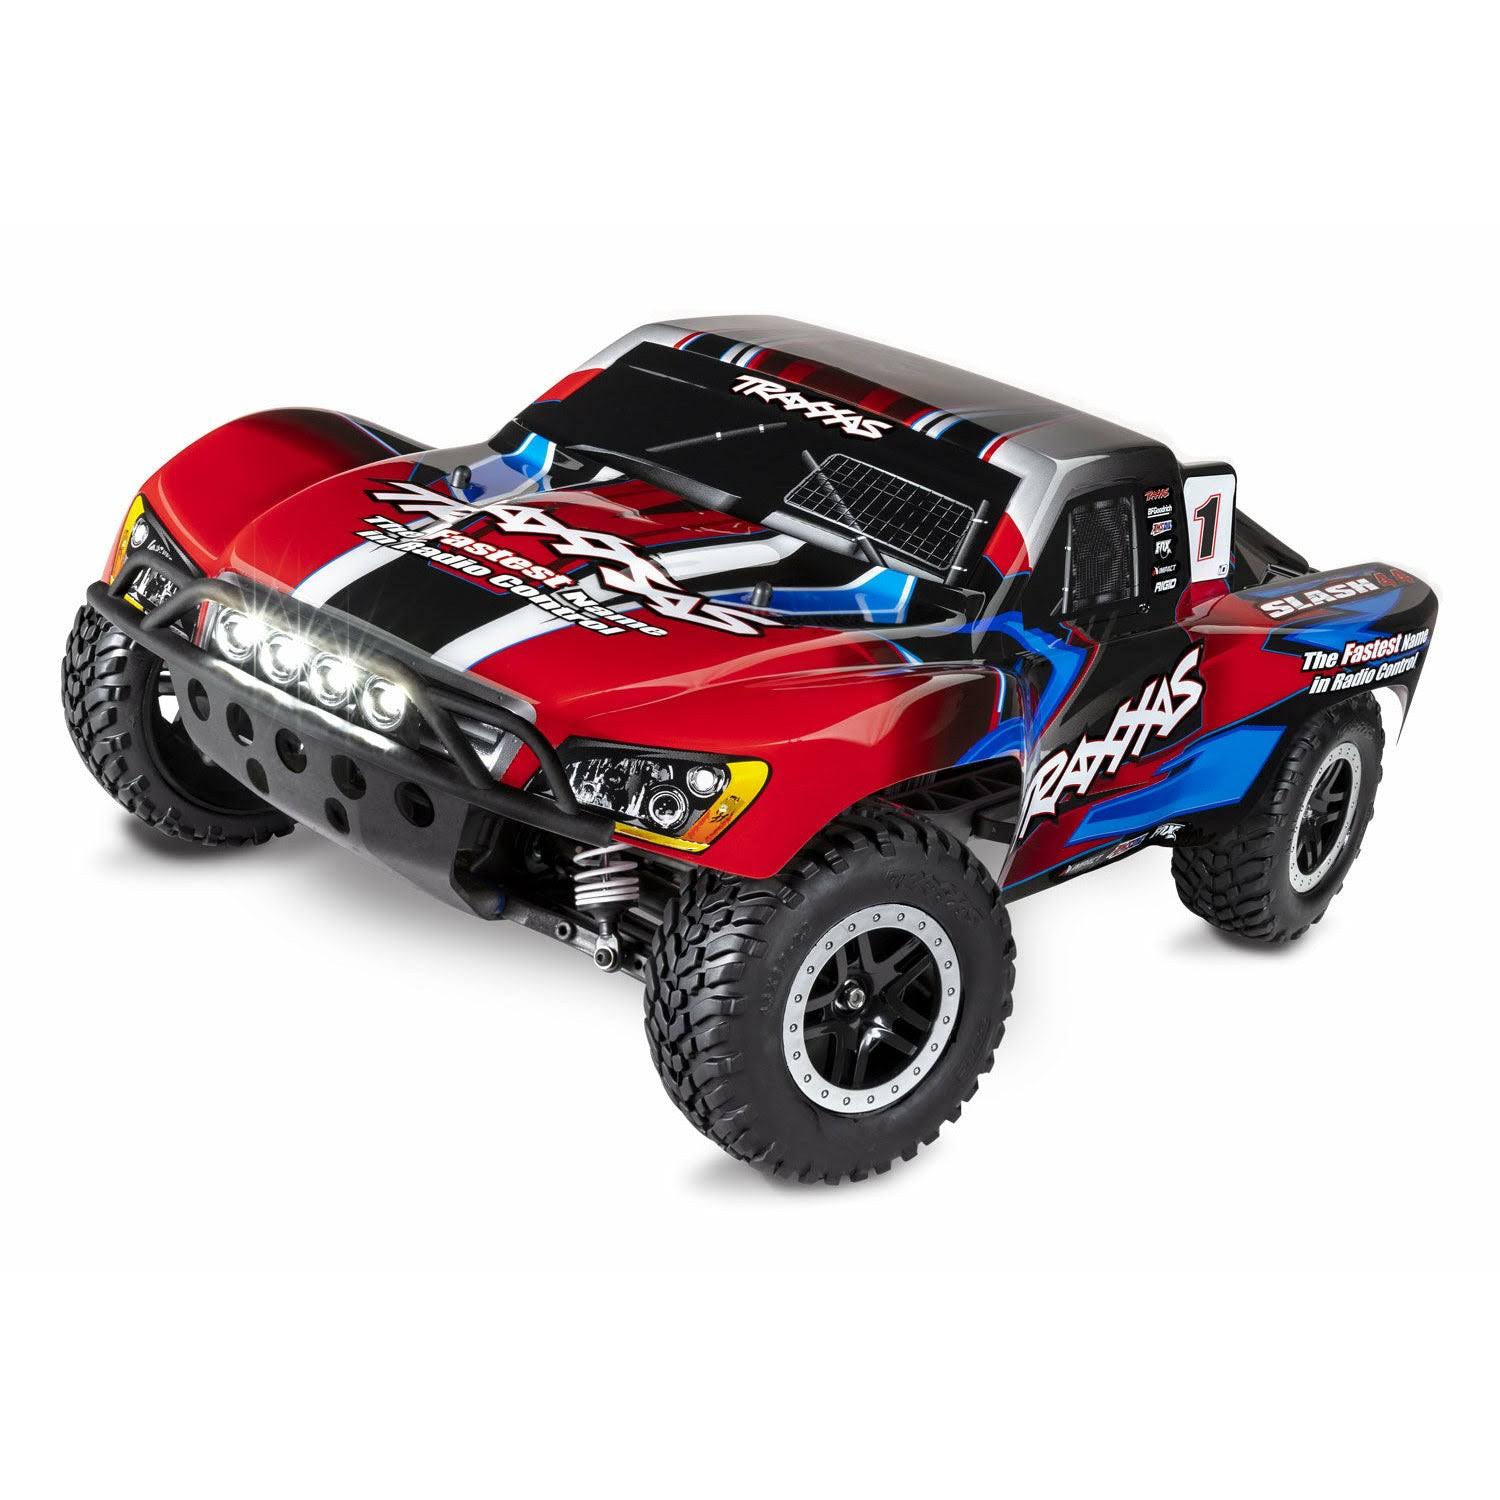 Traxxas Slash 4x4 RTR 4WD Brushed Short Course Truck (Red) w/LED Lights